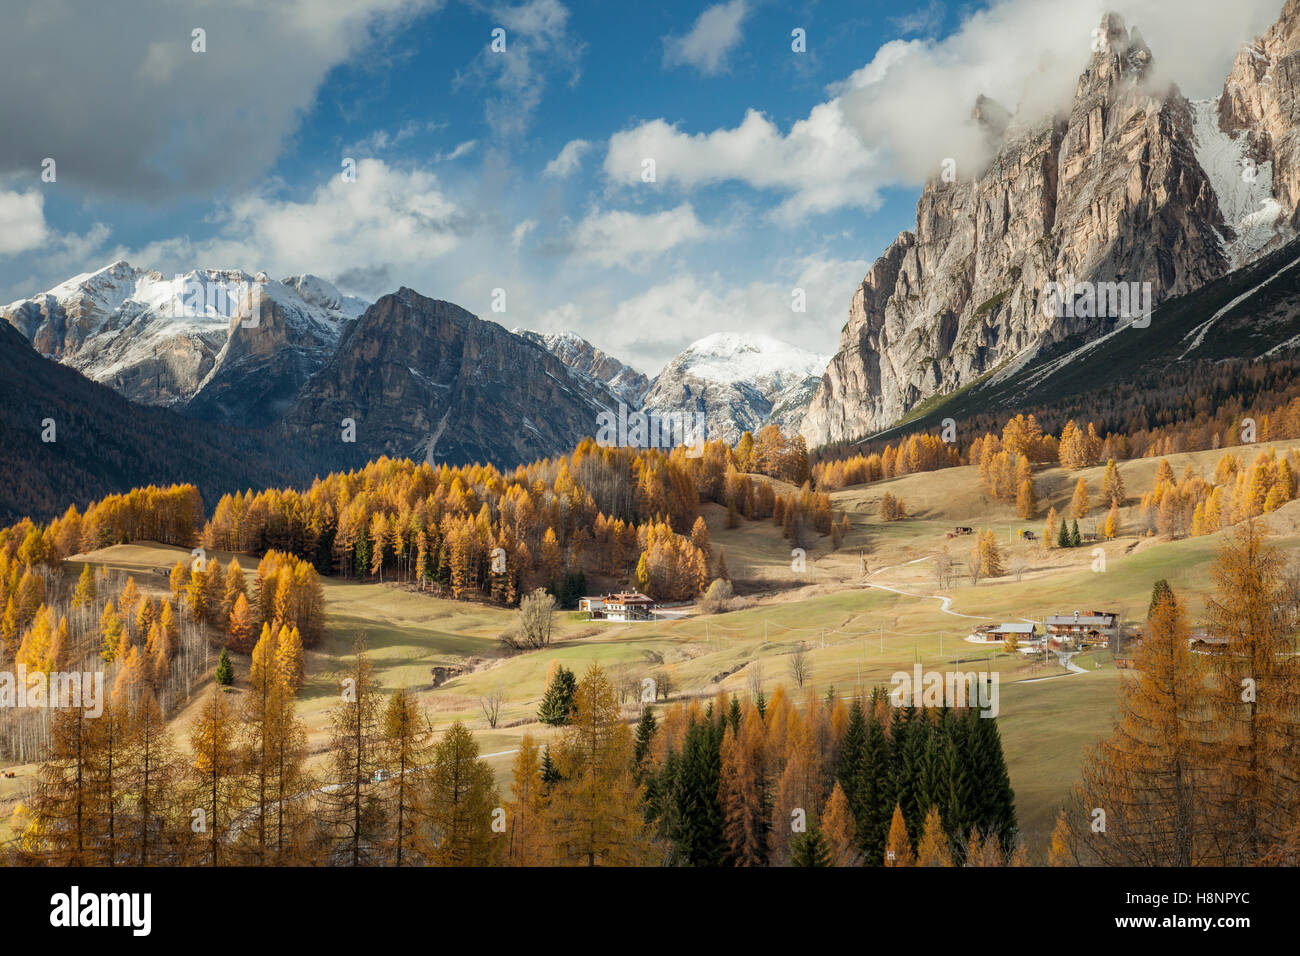 Autumn afternoon in the Dolomites near Cortina d'Ampezzo, Italy. Stock Photo